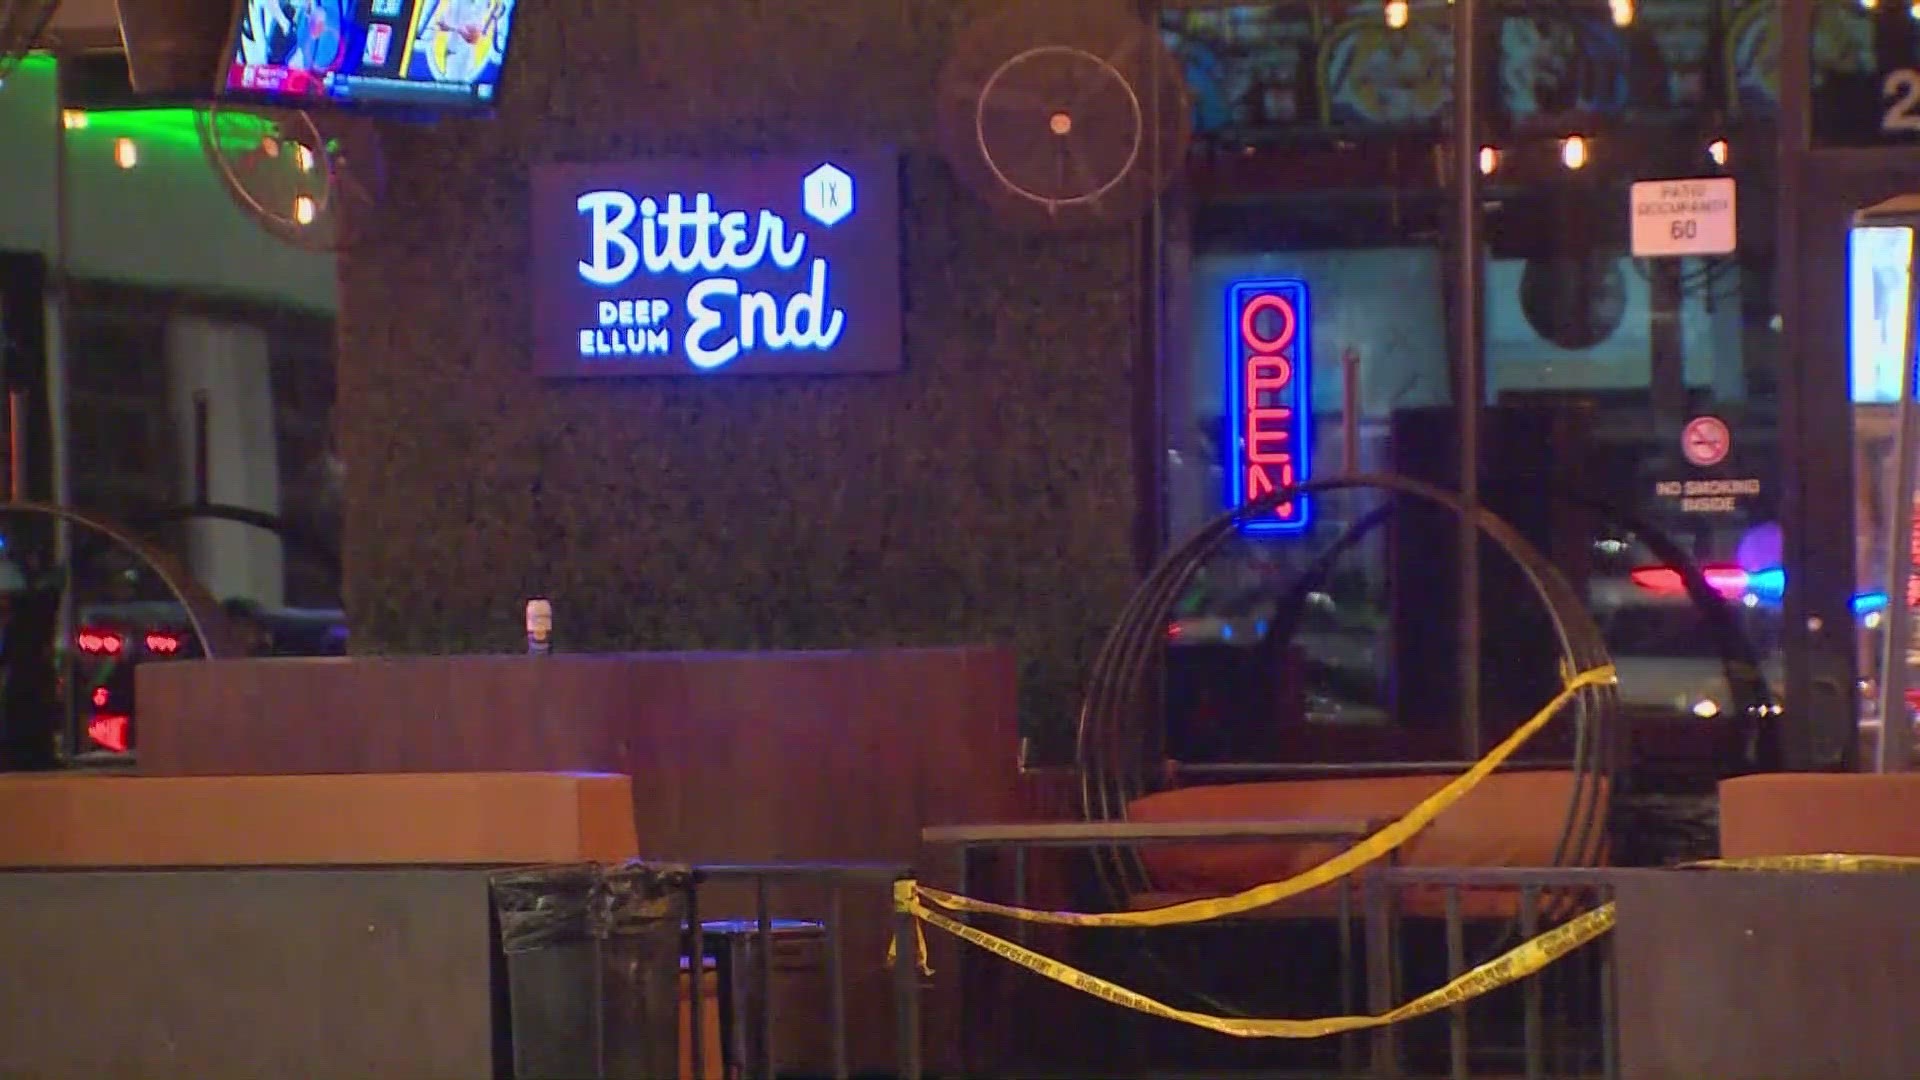 Police say someone walked by the Bitter End bar in Deep Ellum and fired a gun into the building.